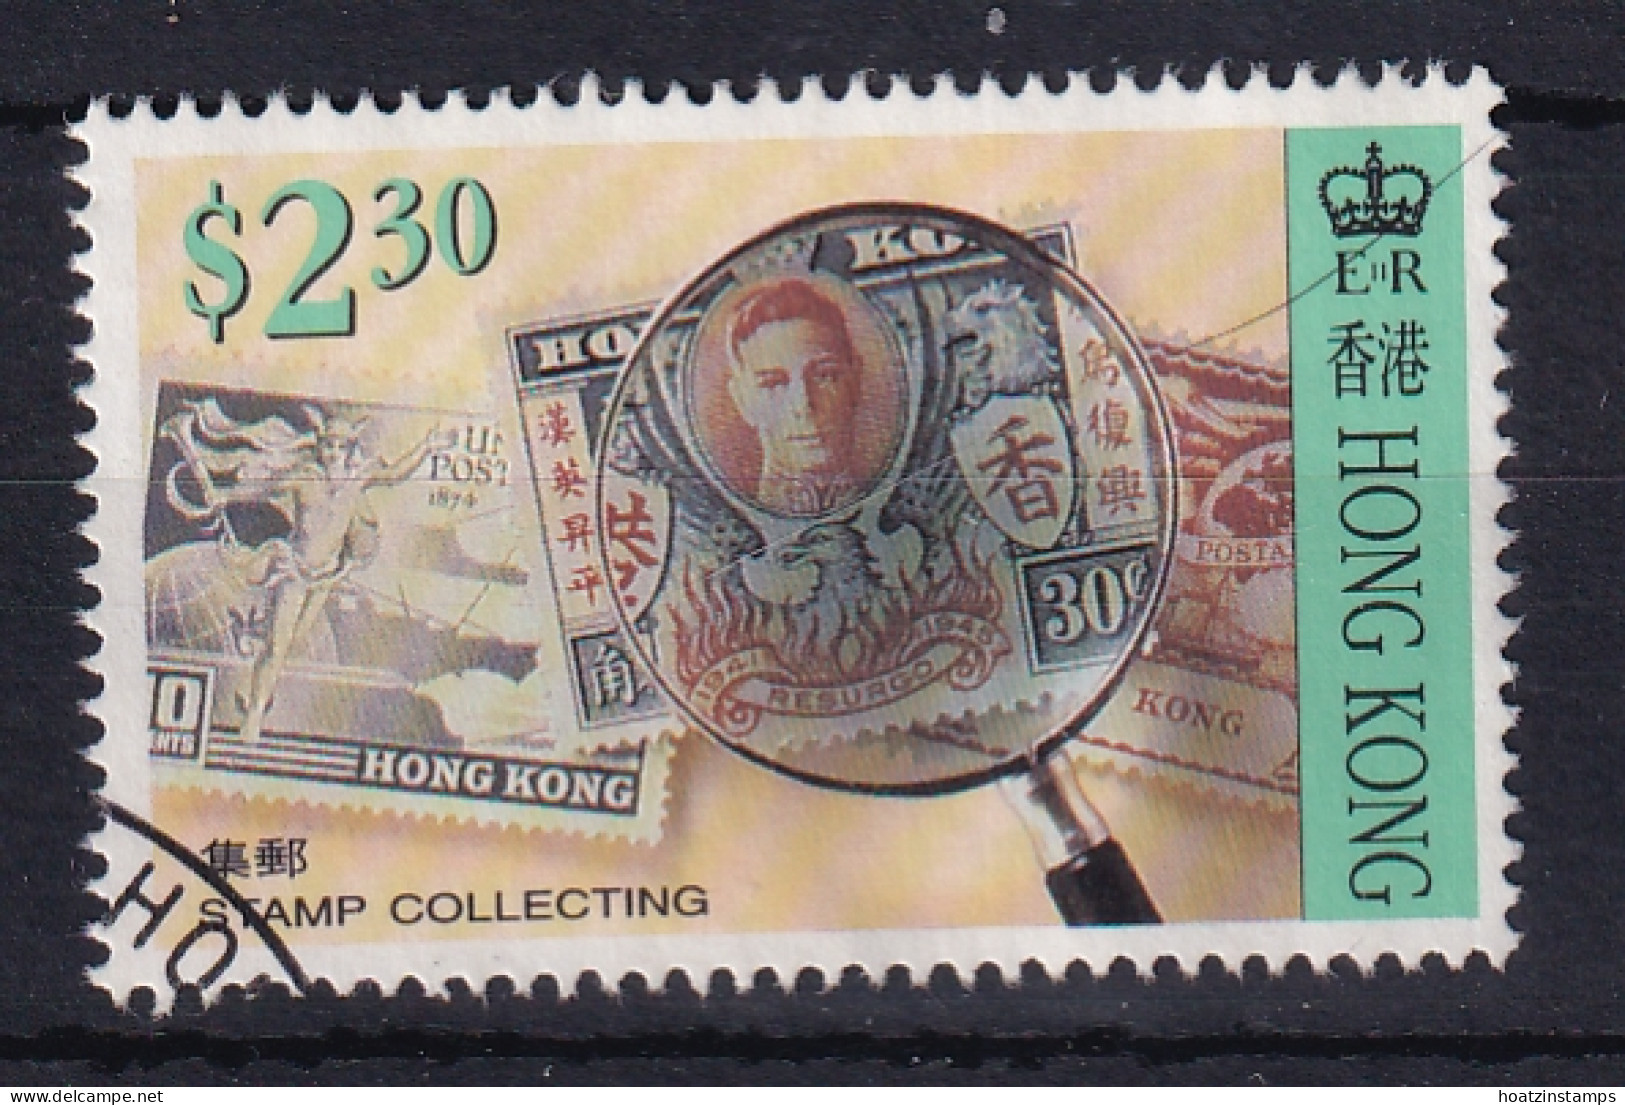 Hong Kong: 1992   Stamp Collecting   SG720    $2.30   Used  - Used Stamps